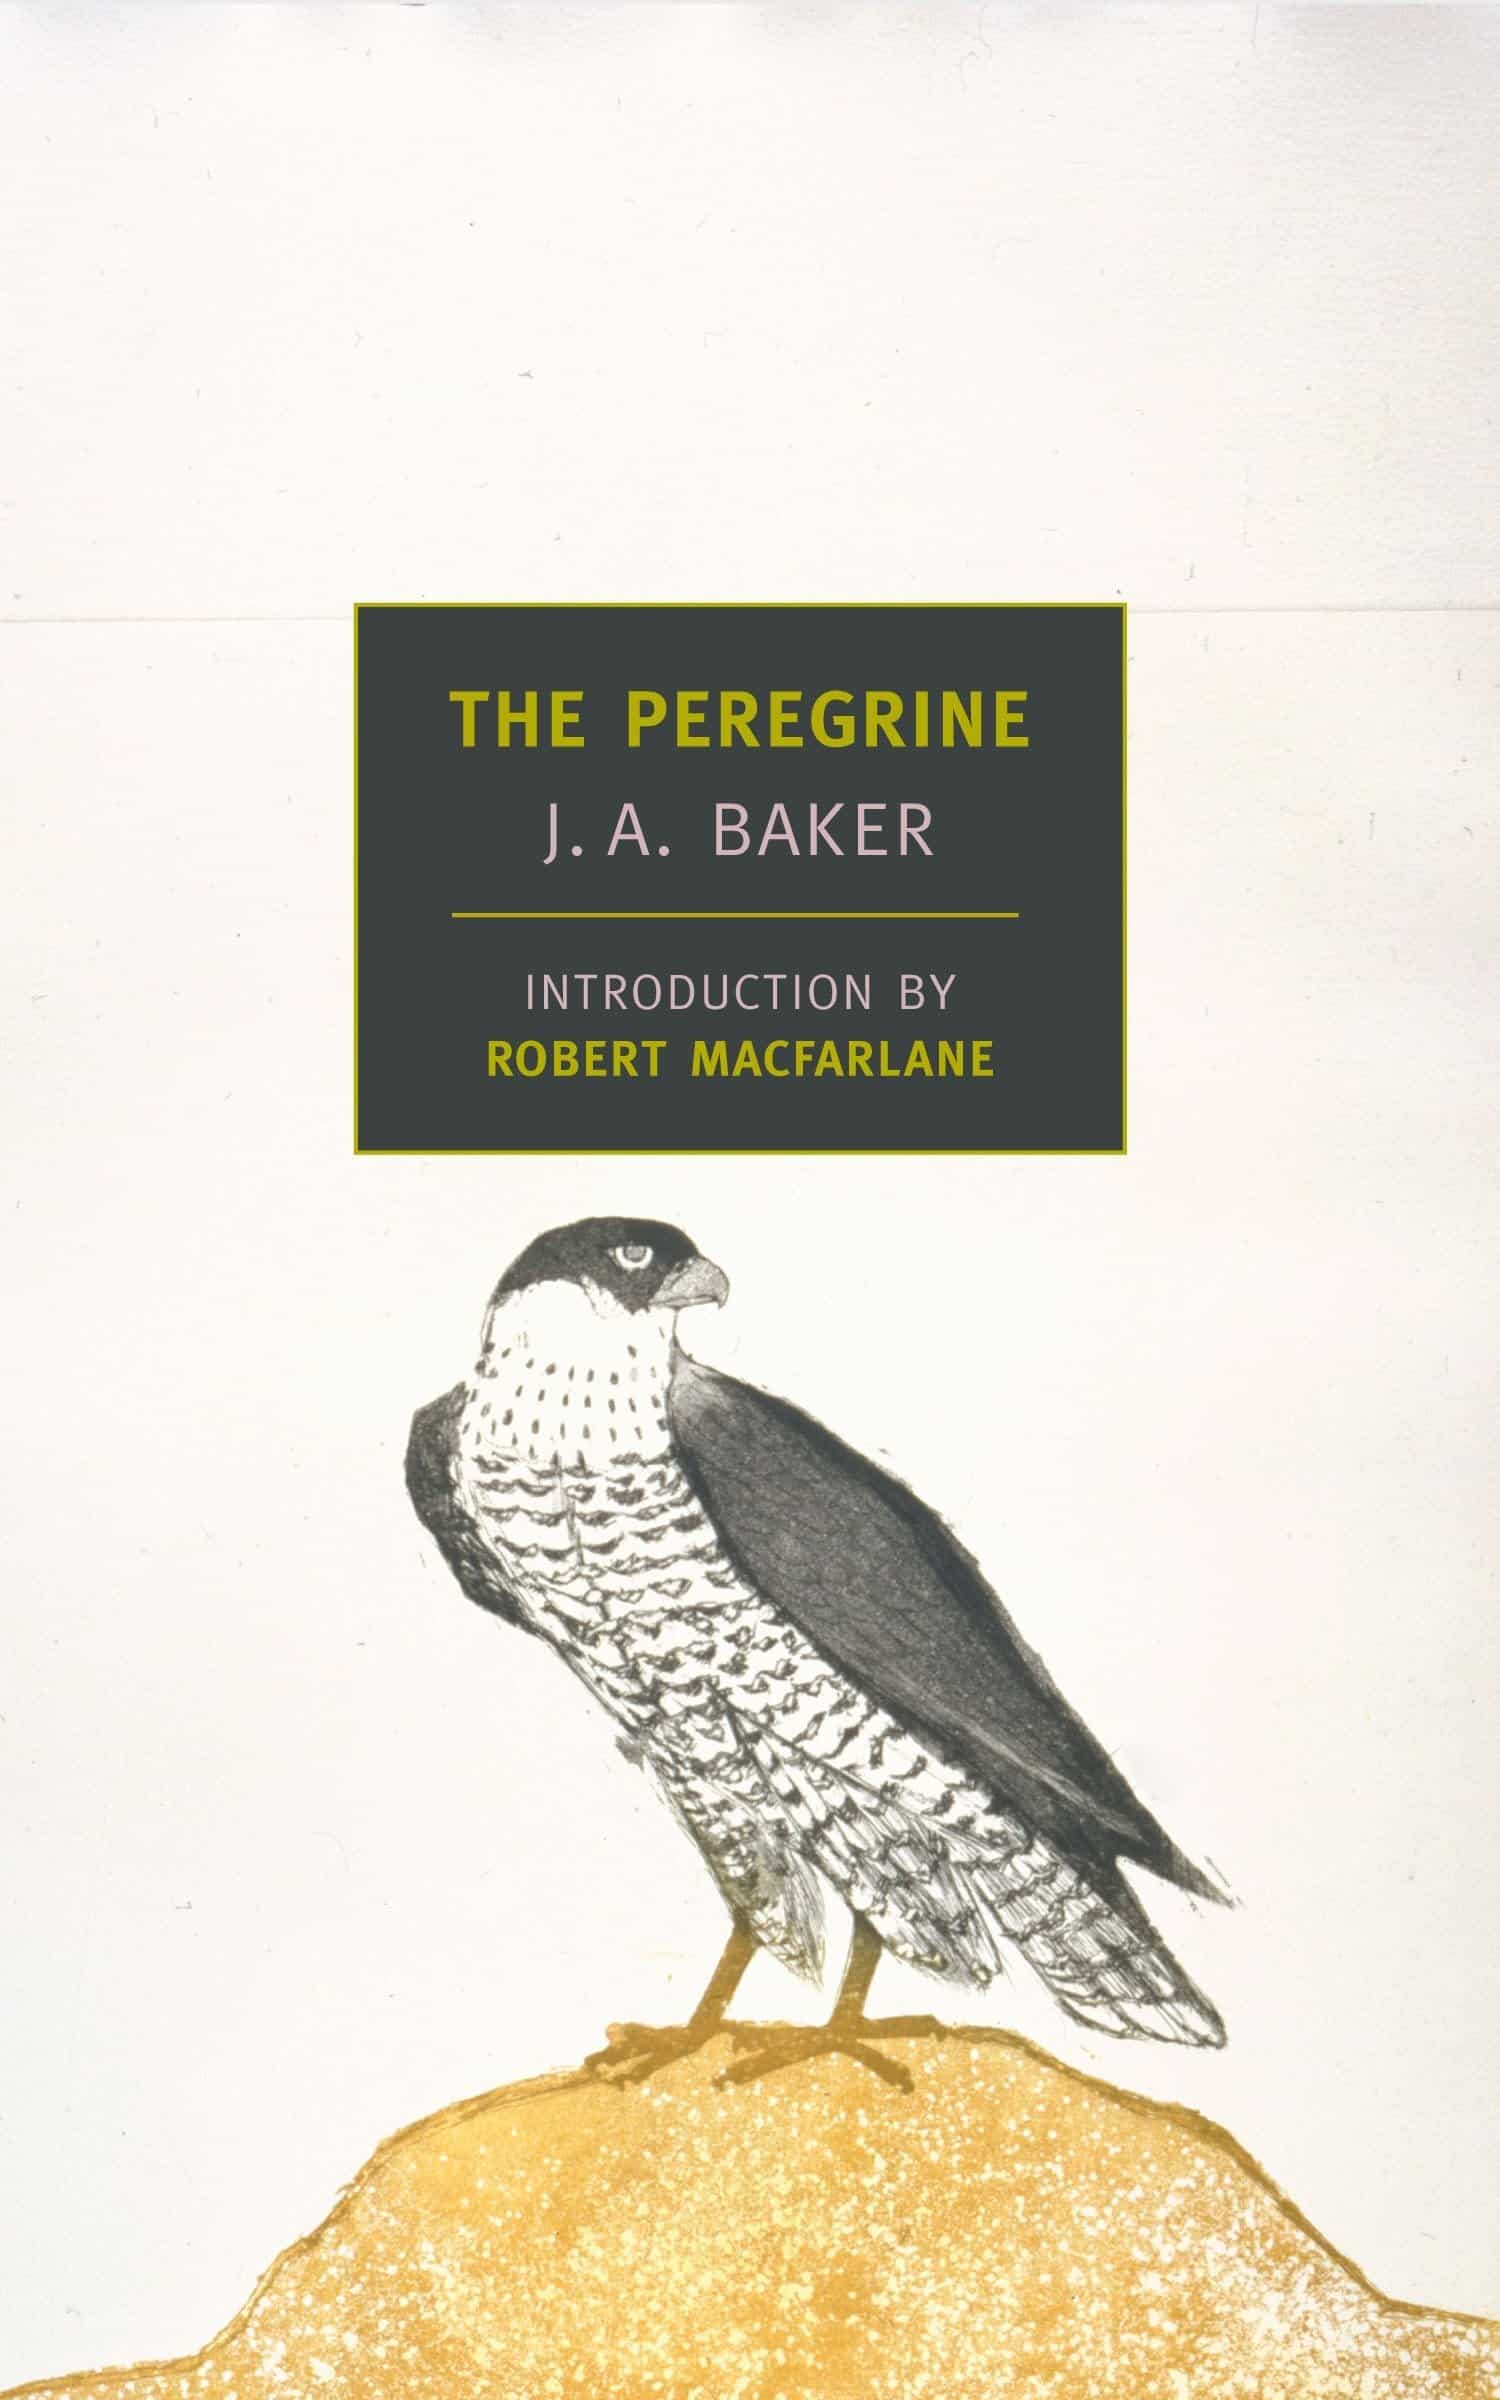 Book cover featuring a drawing a peregrine falcon.